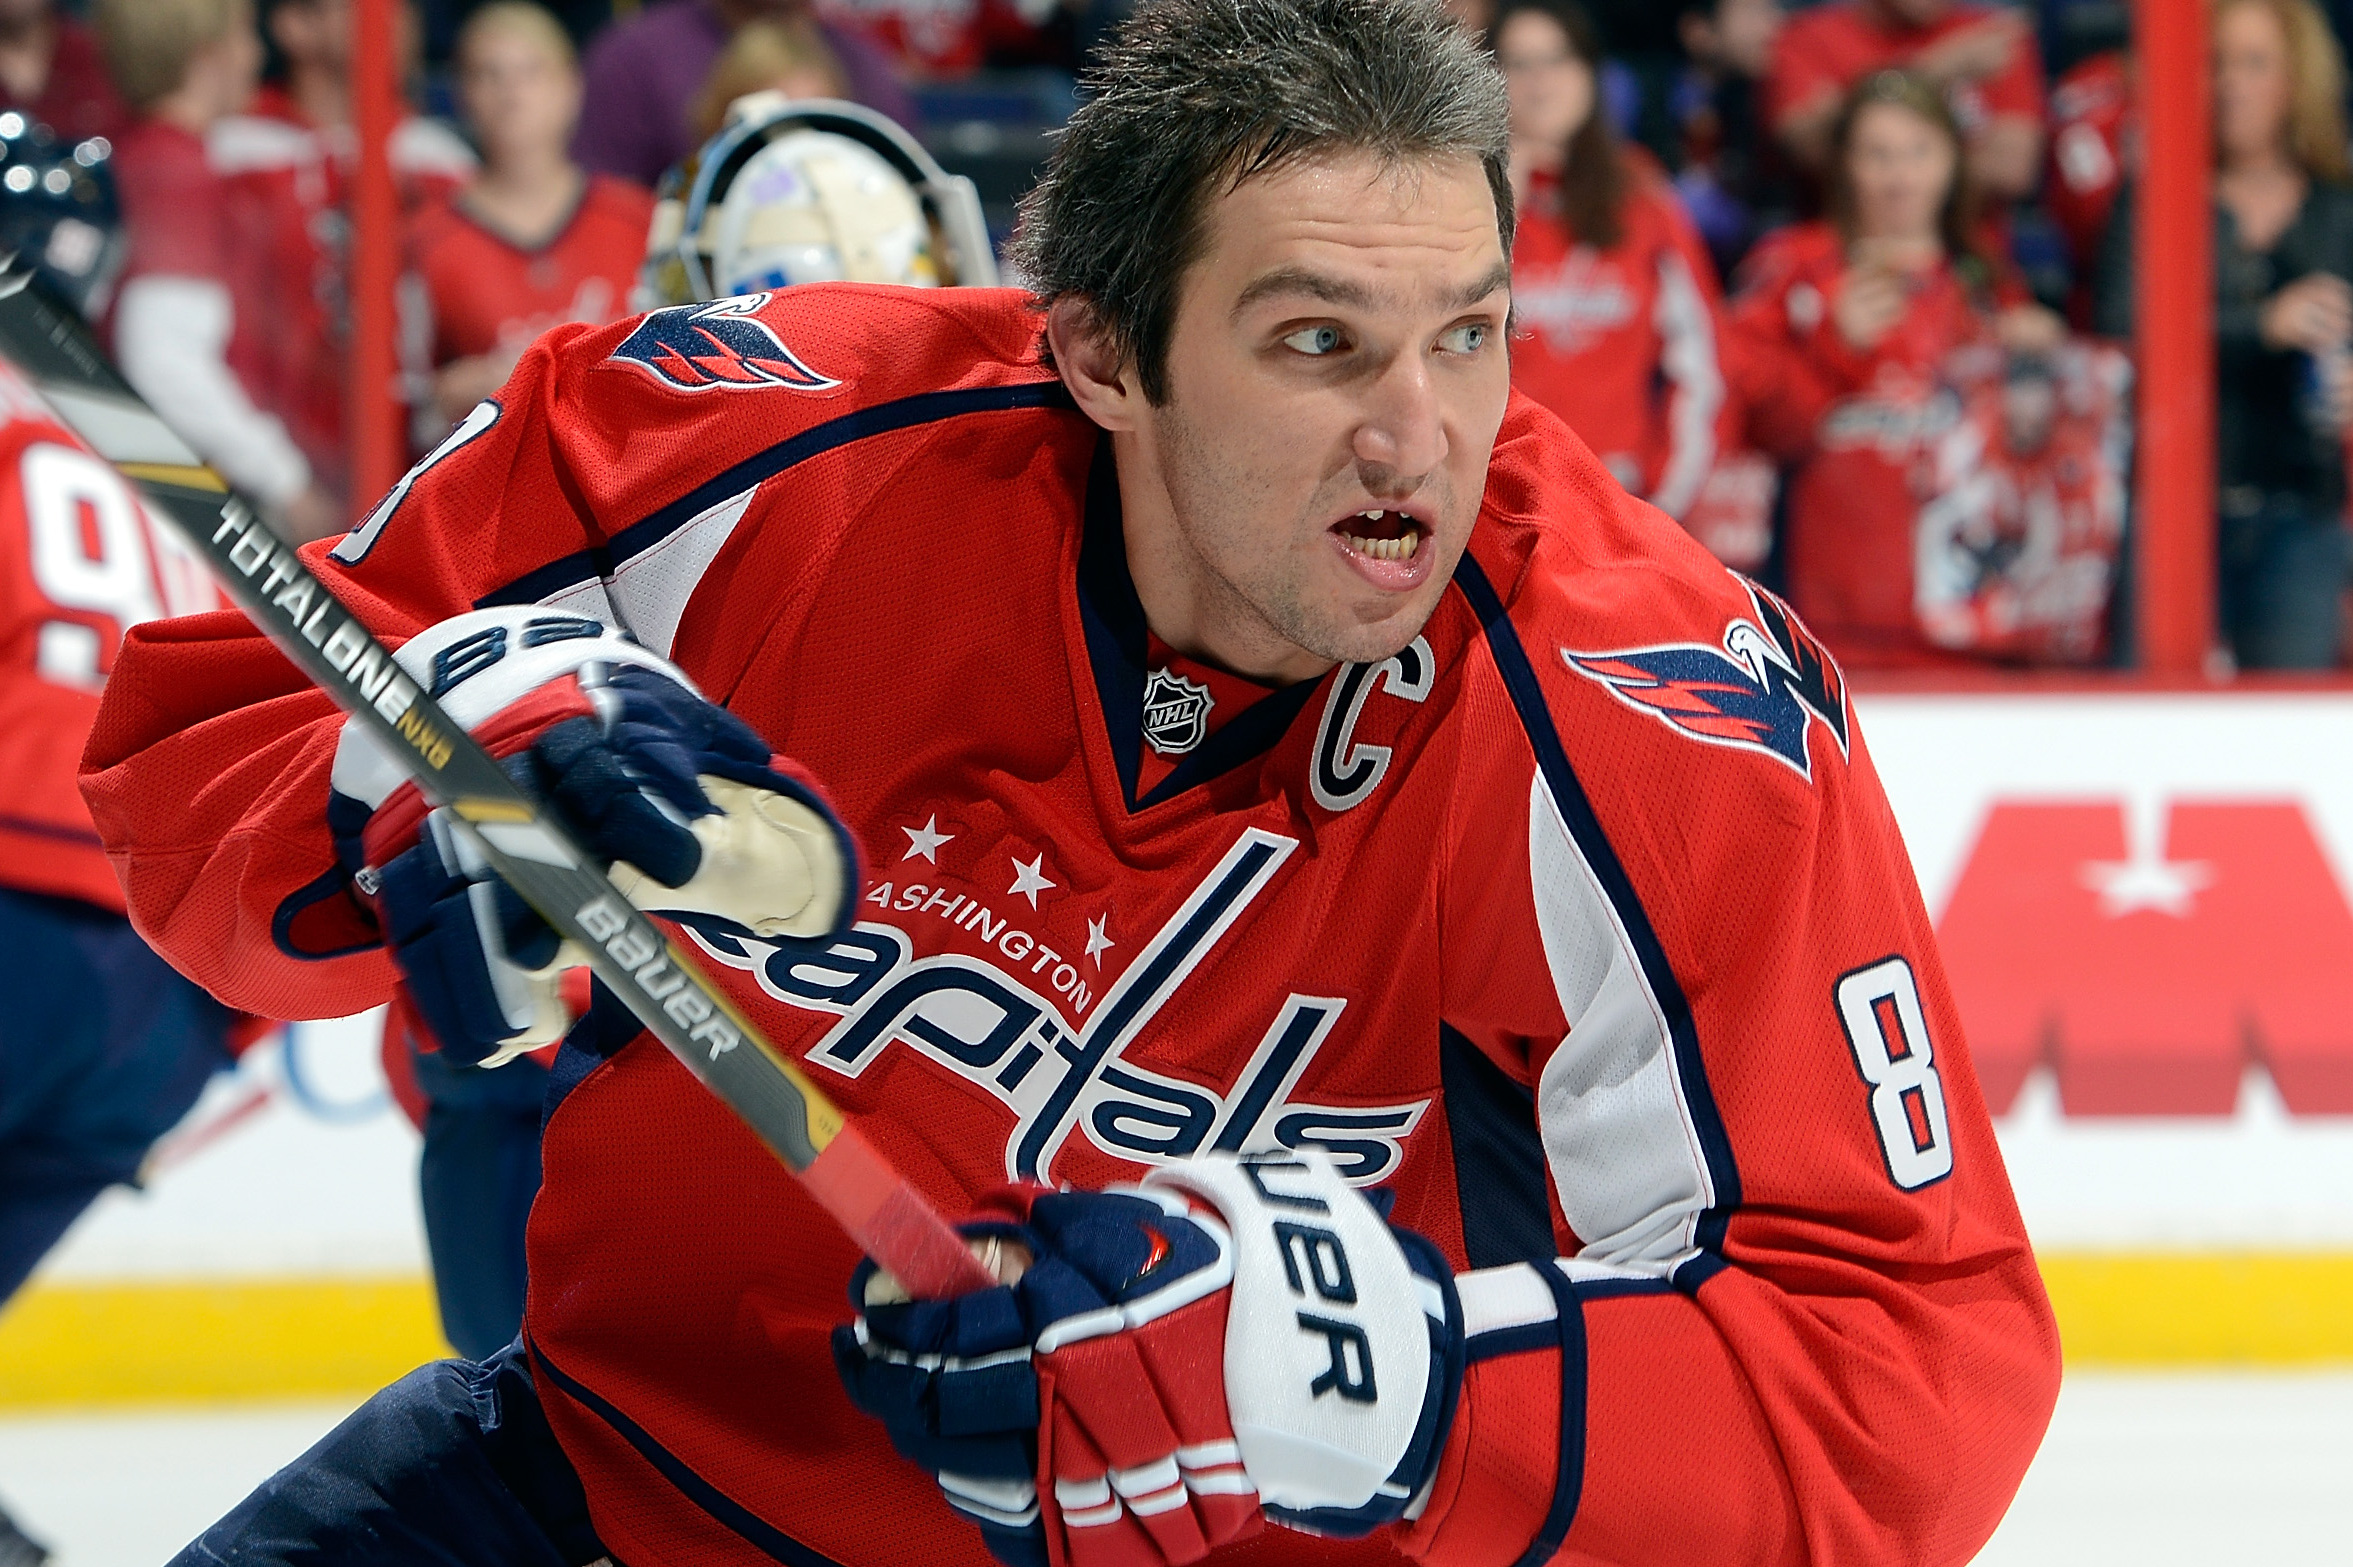 Video: No new car for you, Alex Ovechkin - NBC Sports